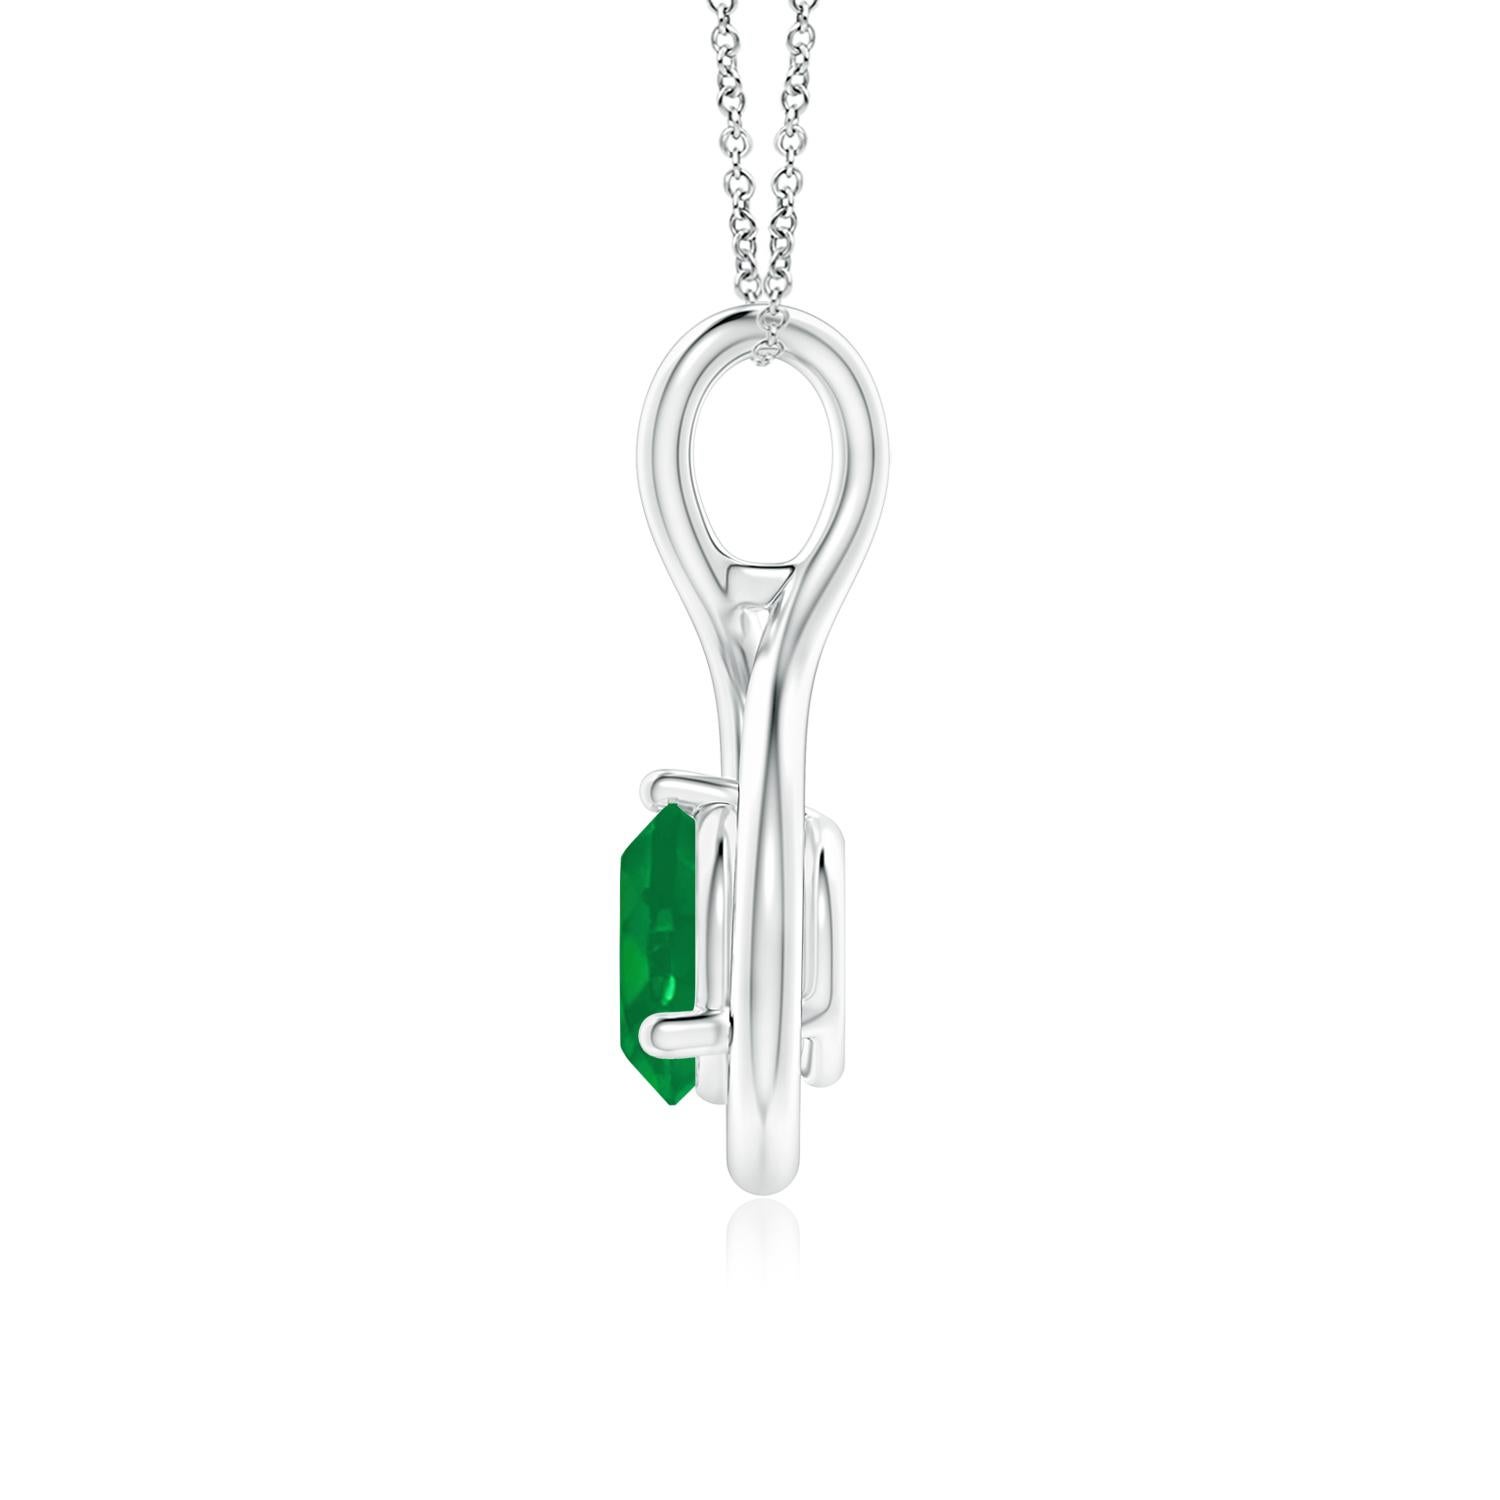 Nestled within a graceful infinity loop is a prong-set solitaire emerald that draws the eye with its lush green hue. The fluid elegance of this lustrous platinum infinity twist pendant evokes a feminine vibe.
Emerald is the Birthstone for May and